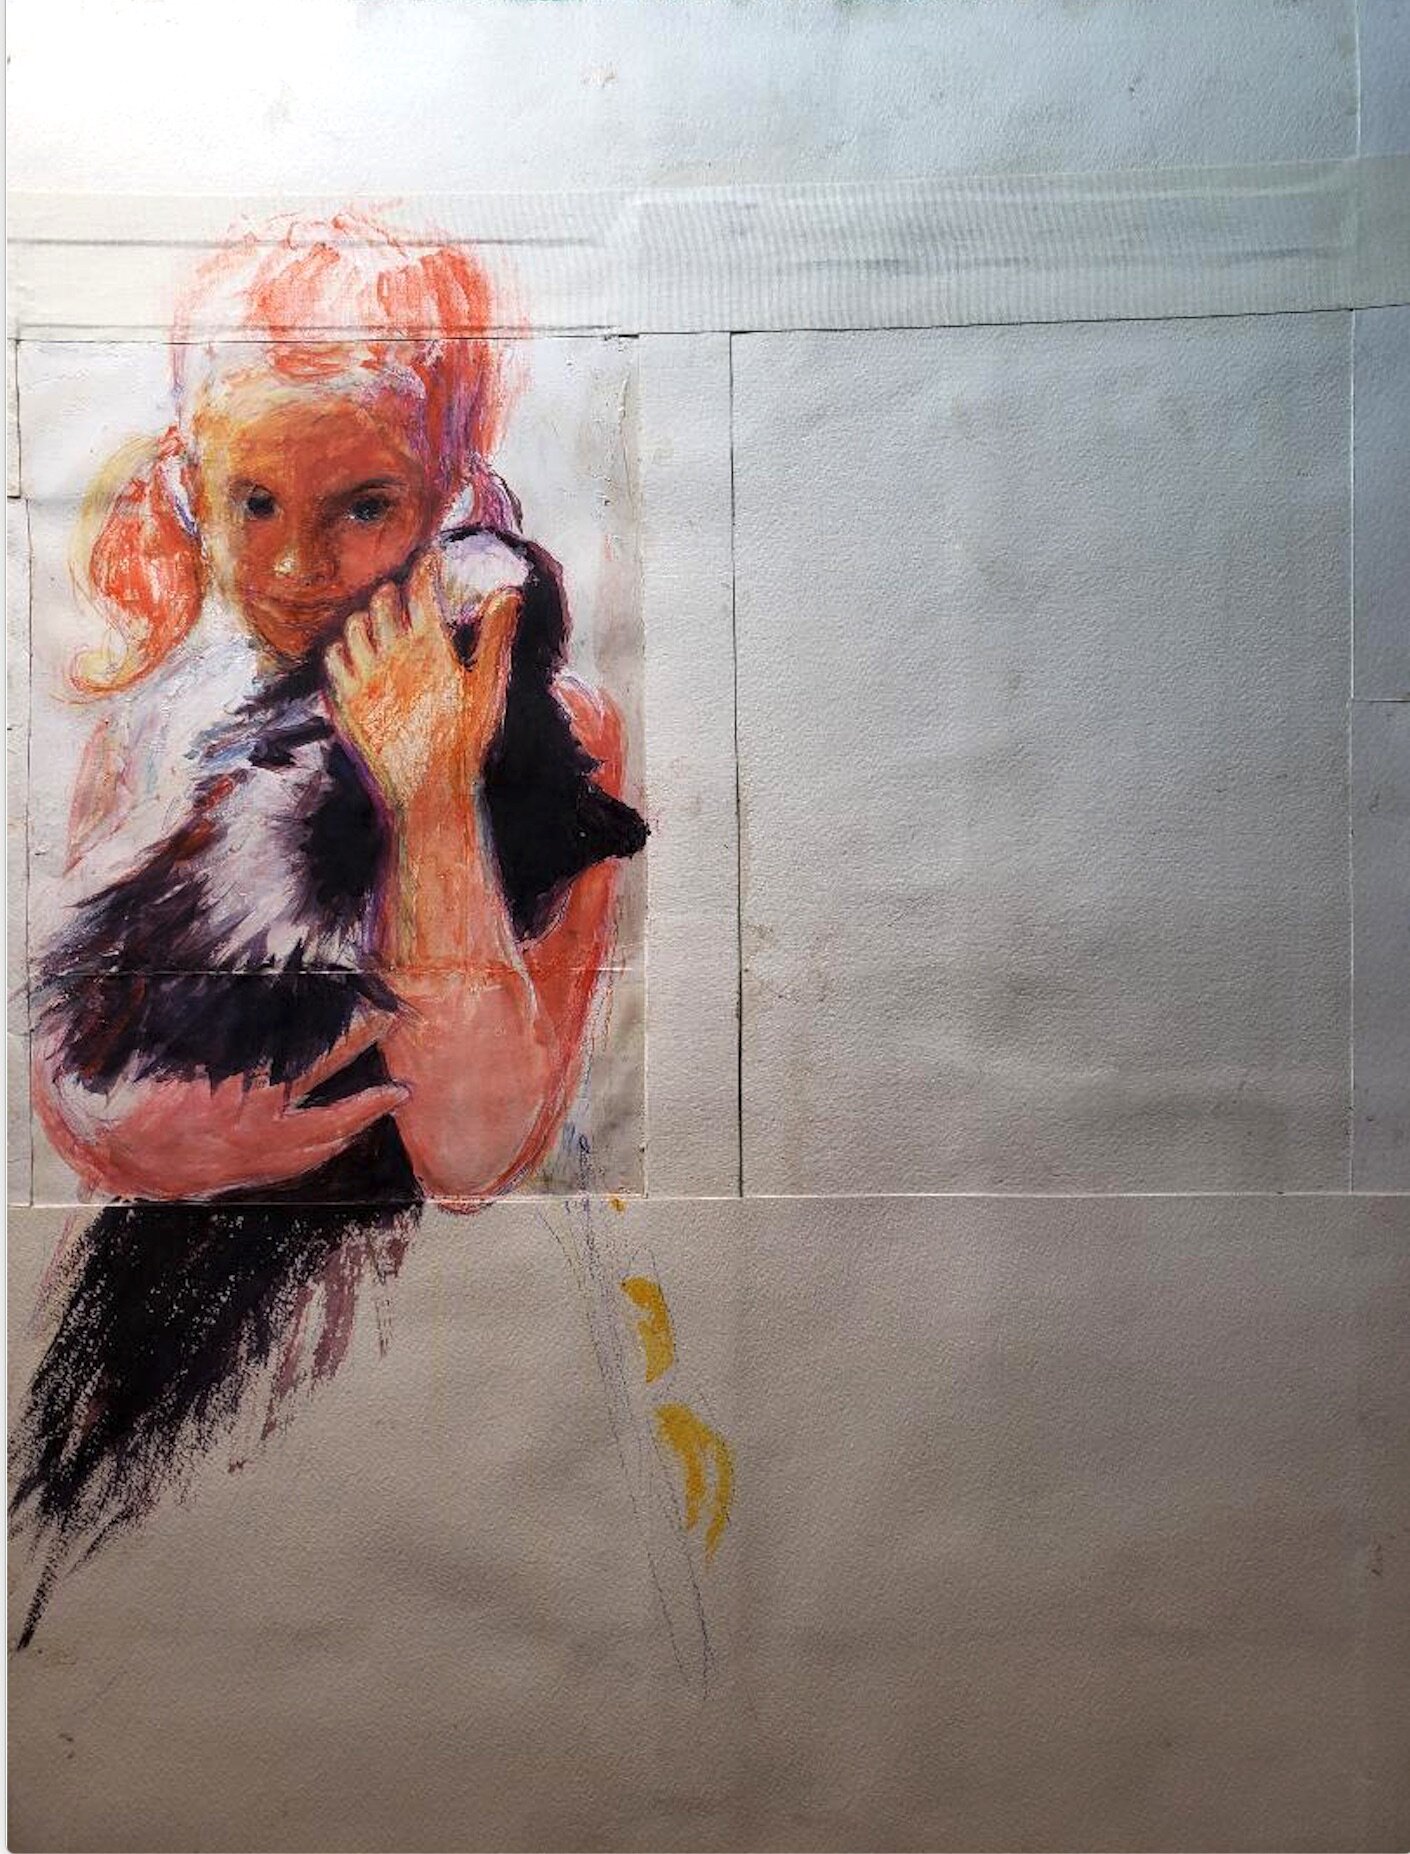   Tamara Krendel ,  Self-portrait with Skunk , mixed-media on patched and taped paper, 24x18 inches, $4,500 